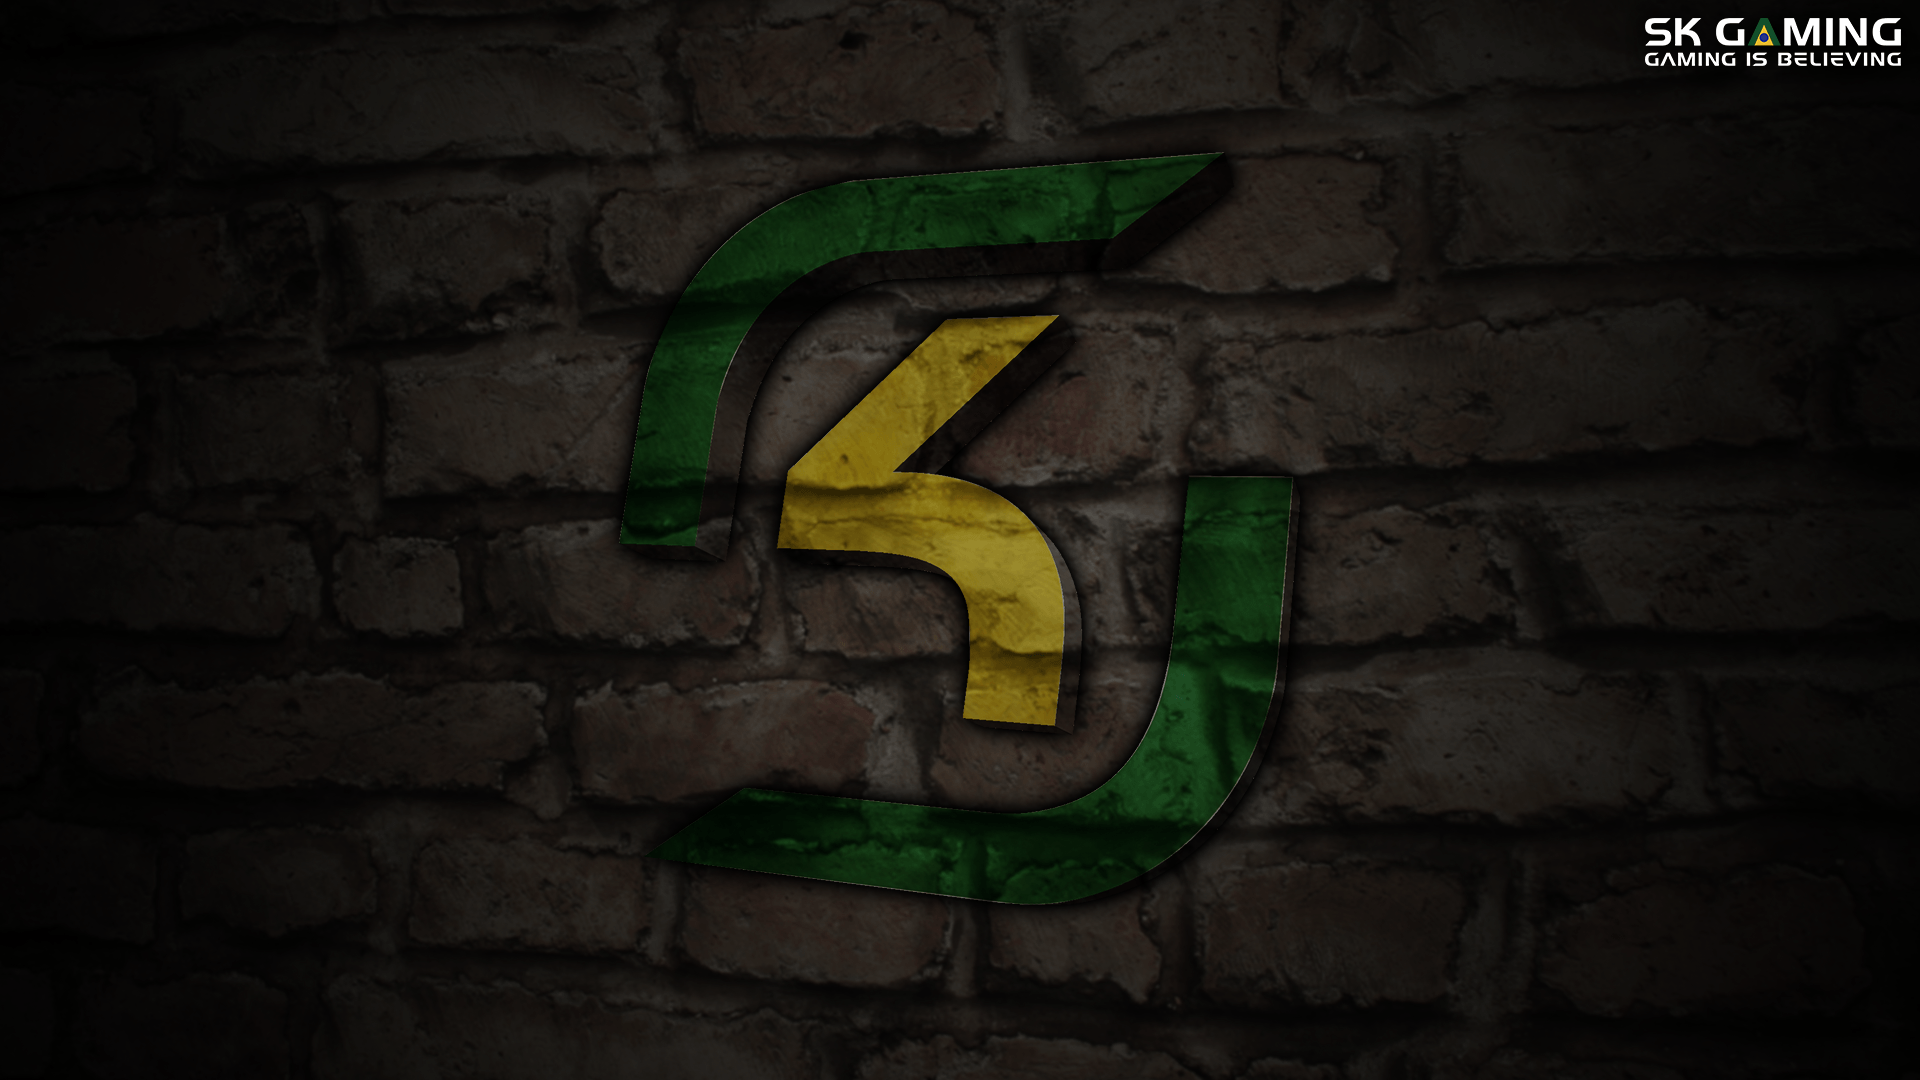 SK Gaming Brazil. CS:GO Wallpaper and Background